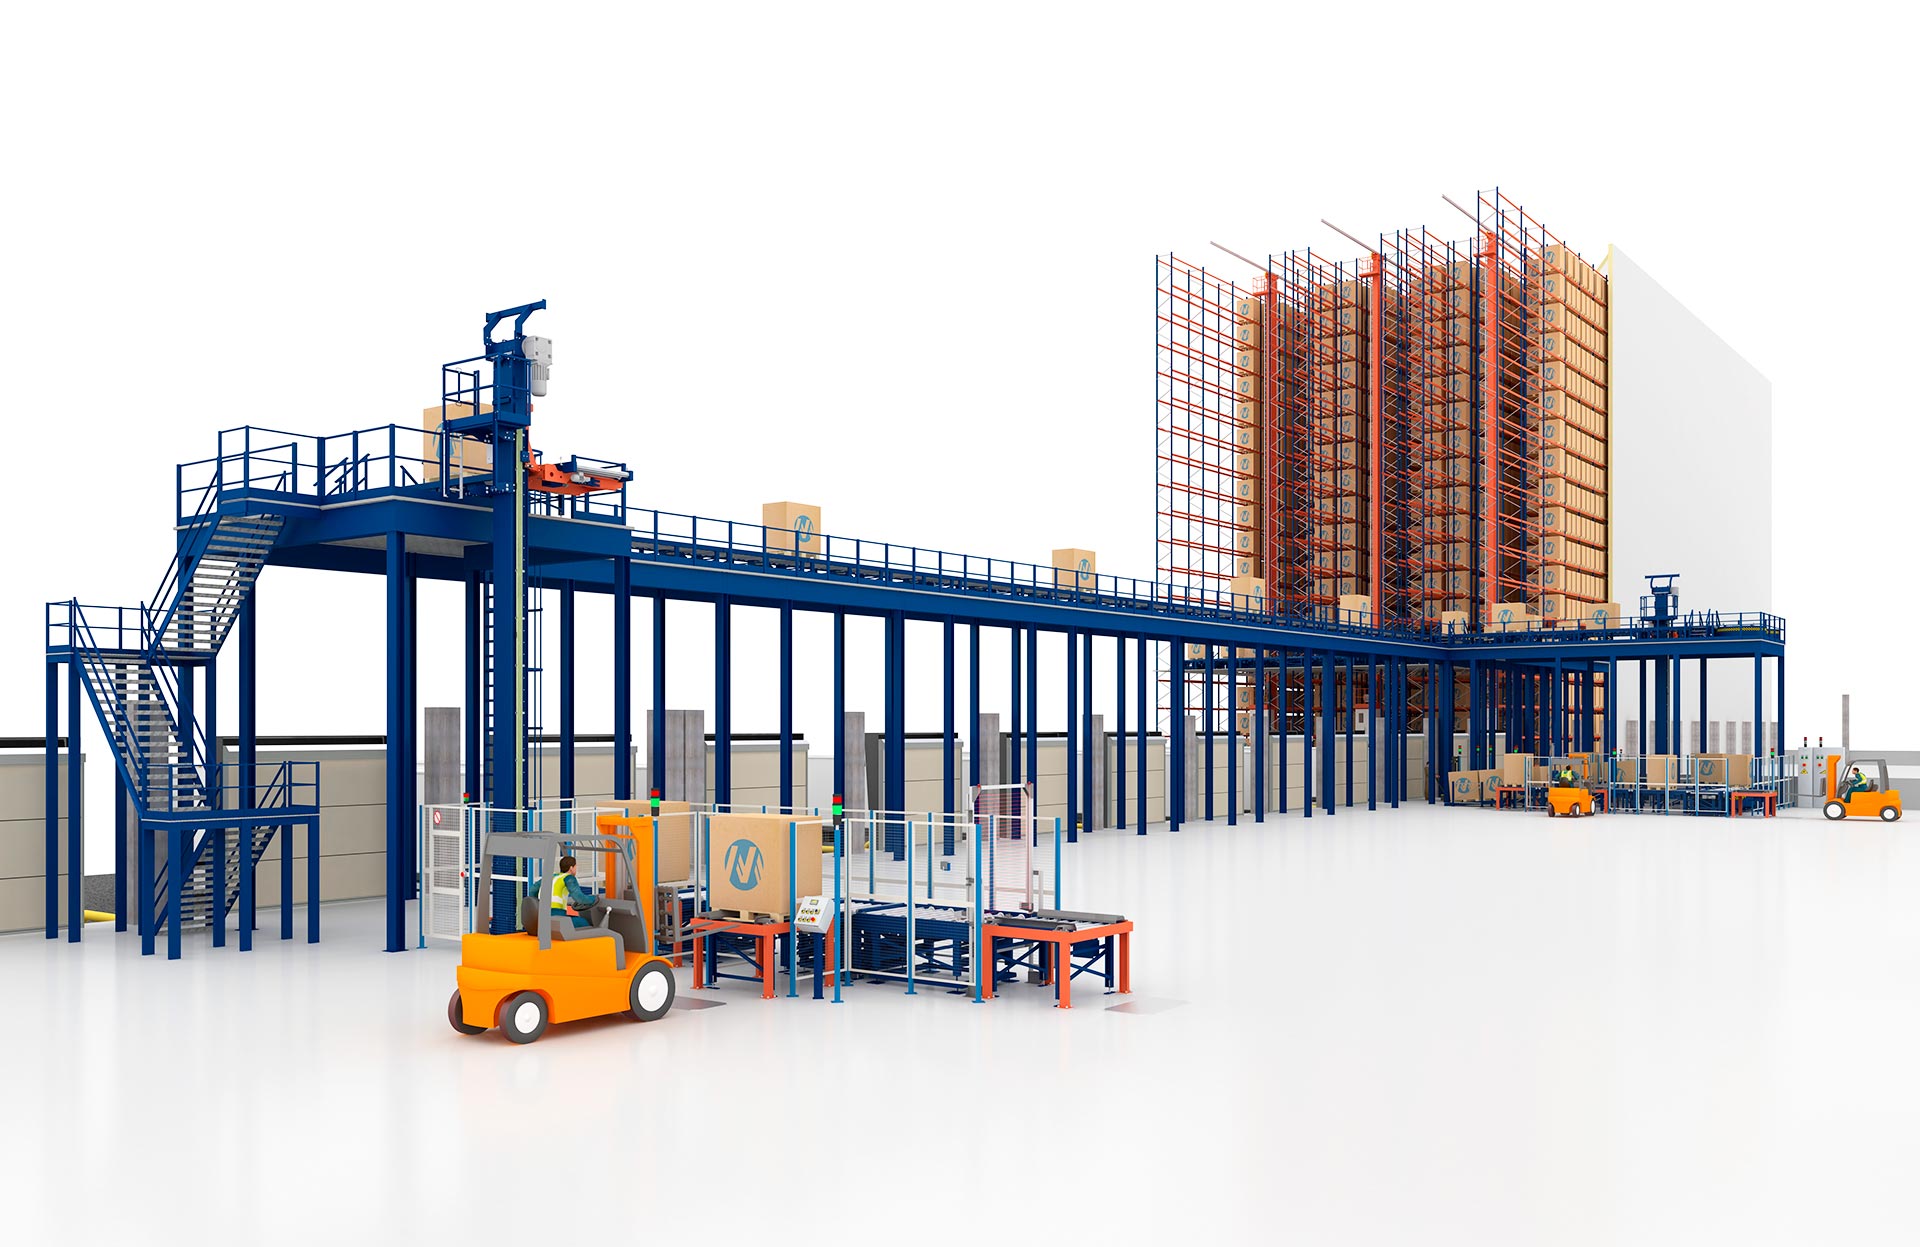 Pallet elevators reduce palletised load transport times by enabling rapid changes in levels